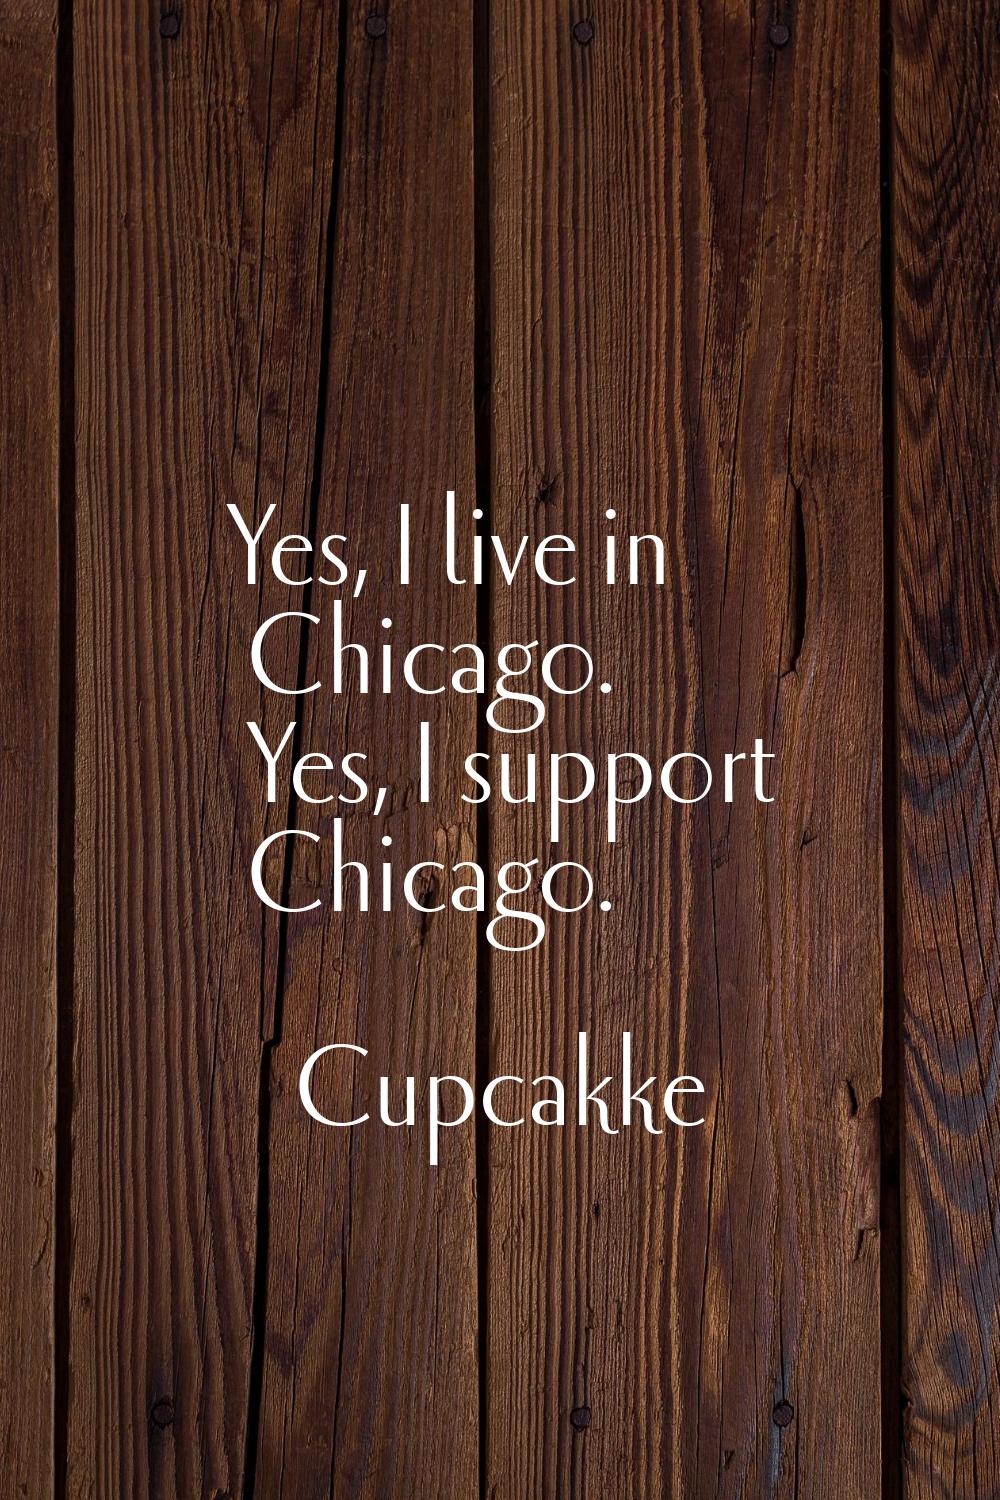 Yes, I live in Chicago. Yes, I support Chicago.